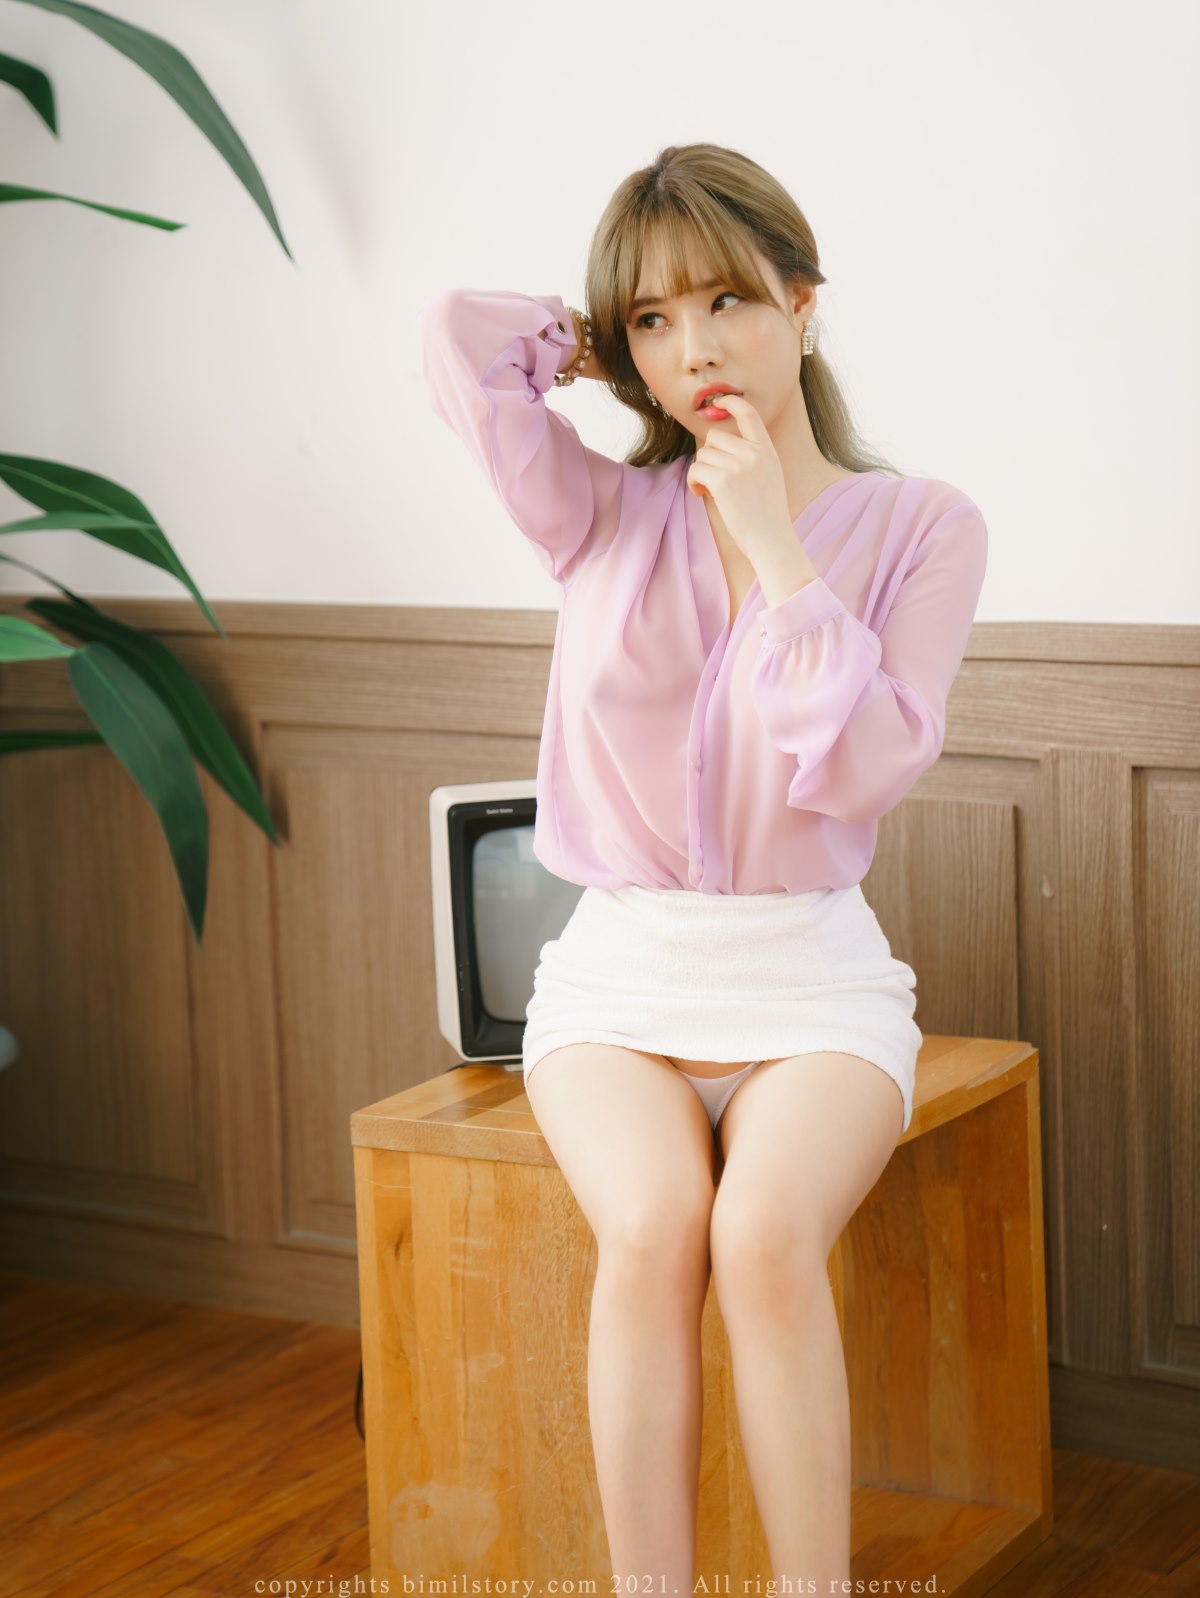 Bimilstory Eunha 은하 Vol 04 How to Dress in Case of F Cup Size Woman 0021 8721344390.jpg